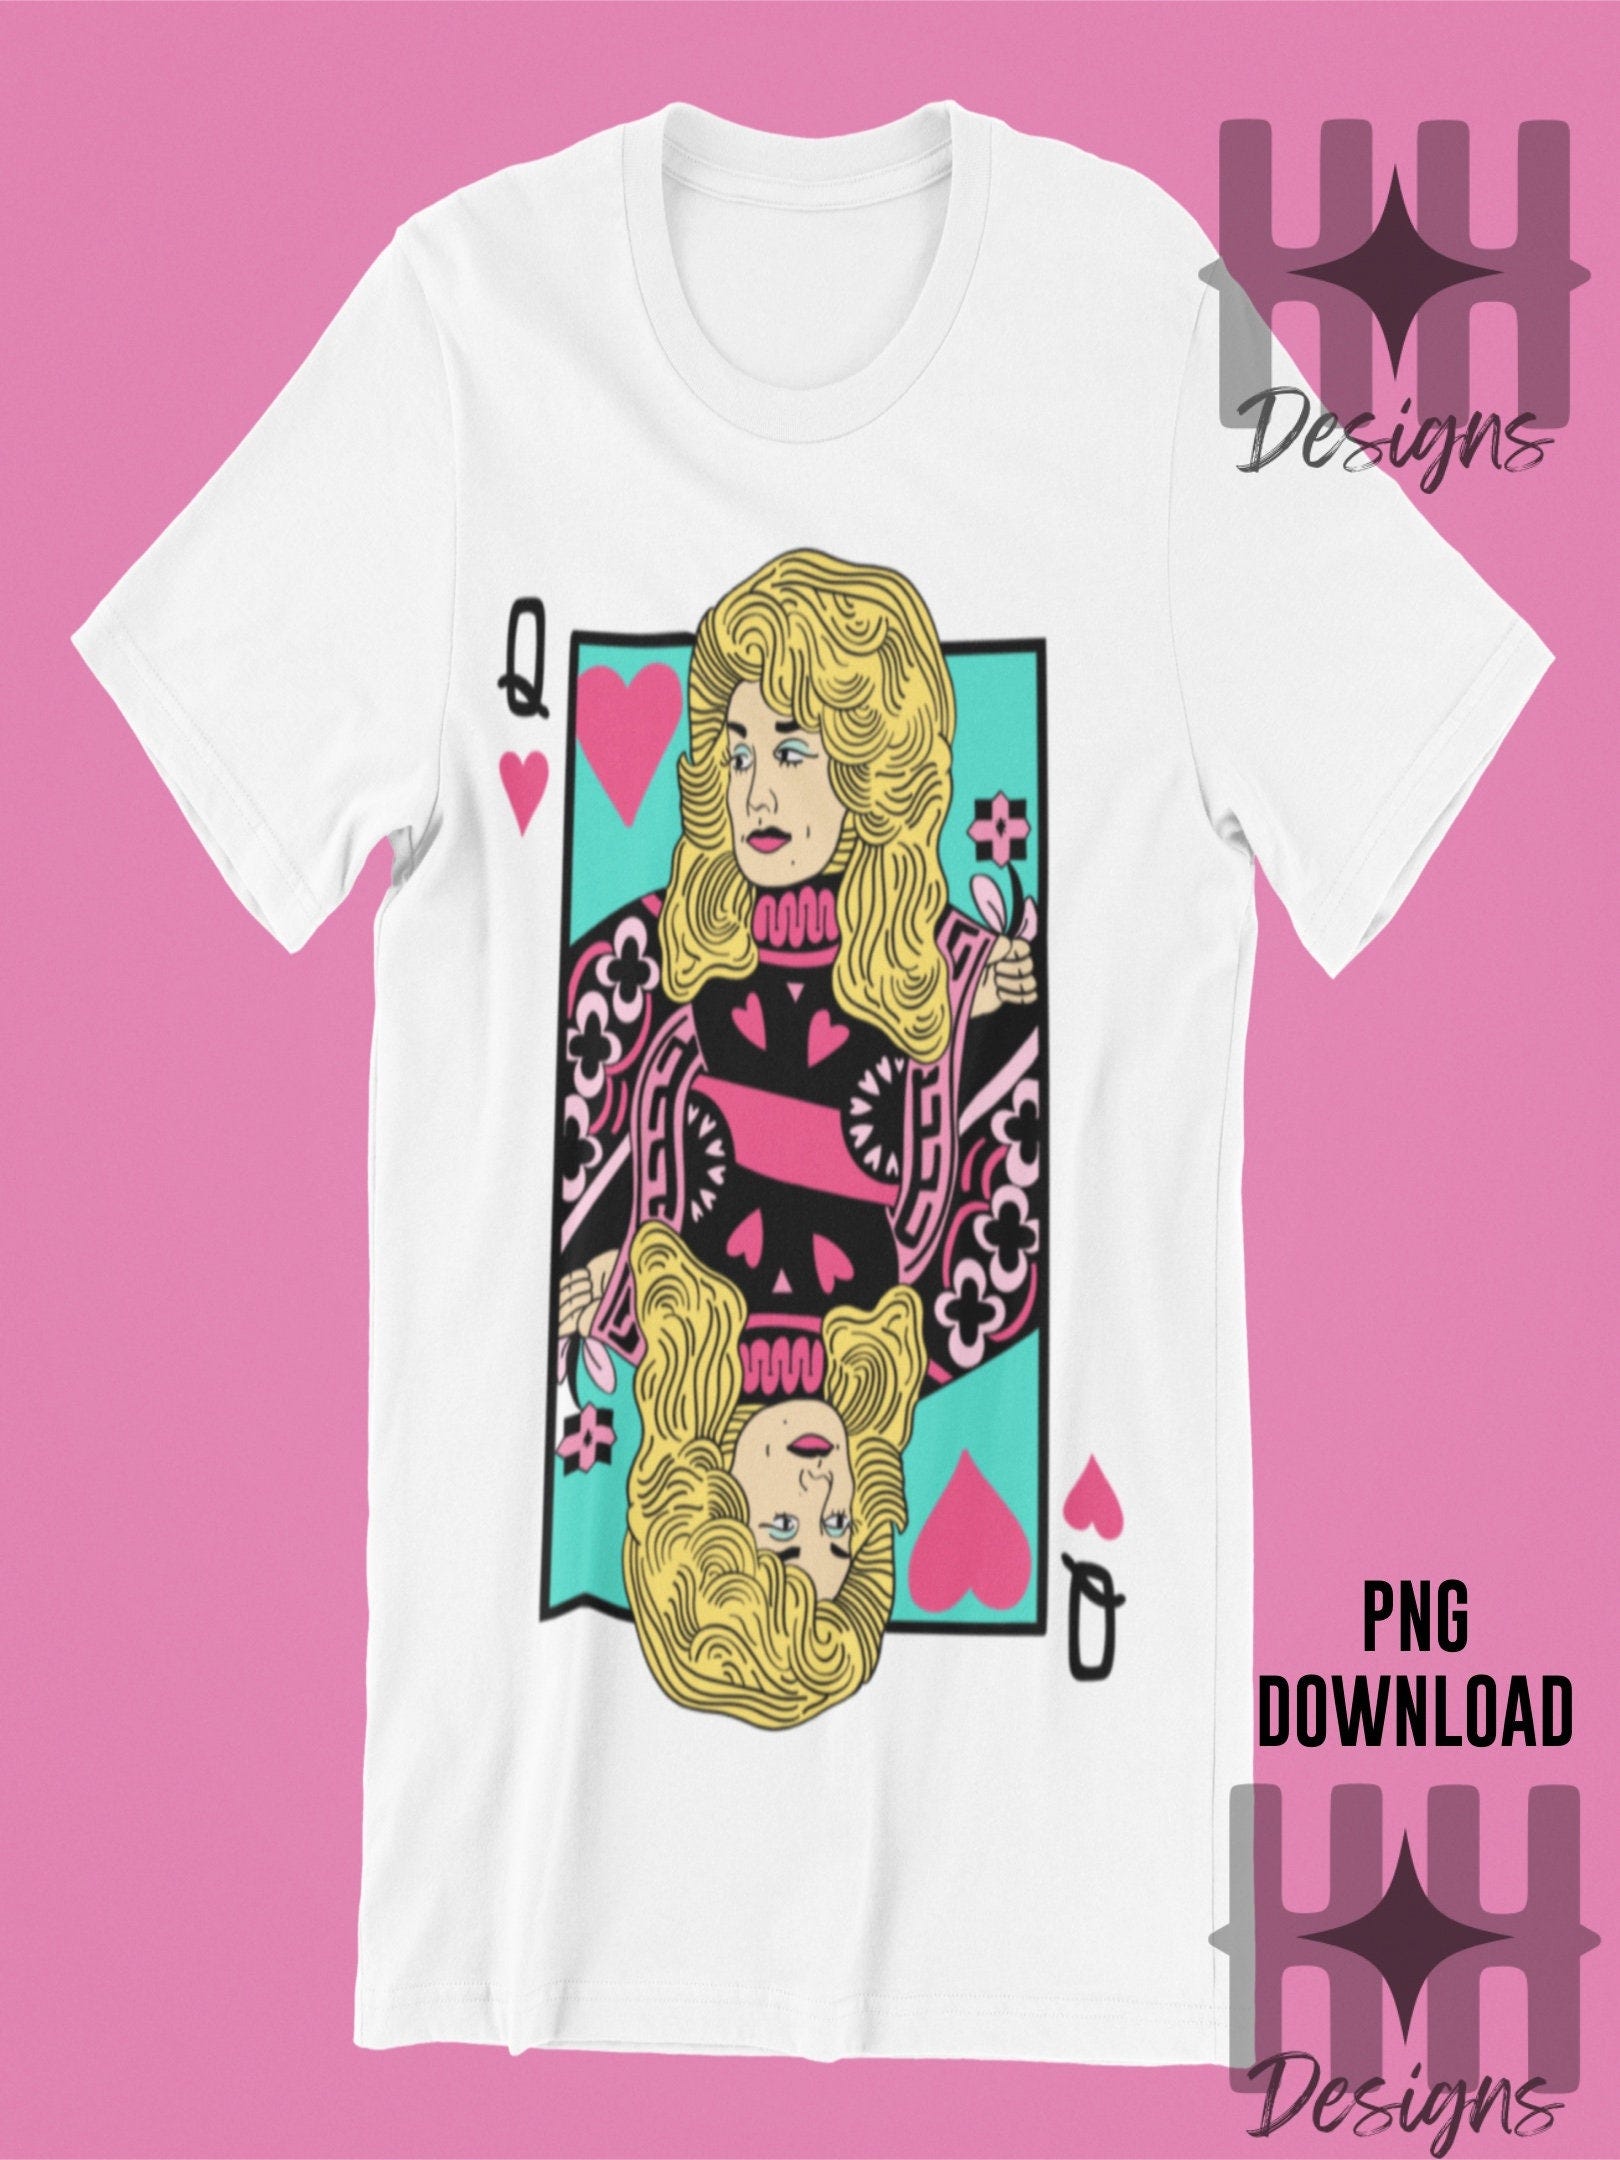 Dolly Parton PNG, Dolly PNG, Queen of Hearts PNG, Vegas Png, Nashville Png, Hearts png, bachelorette png, birthday png, girls night png